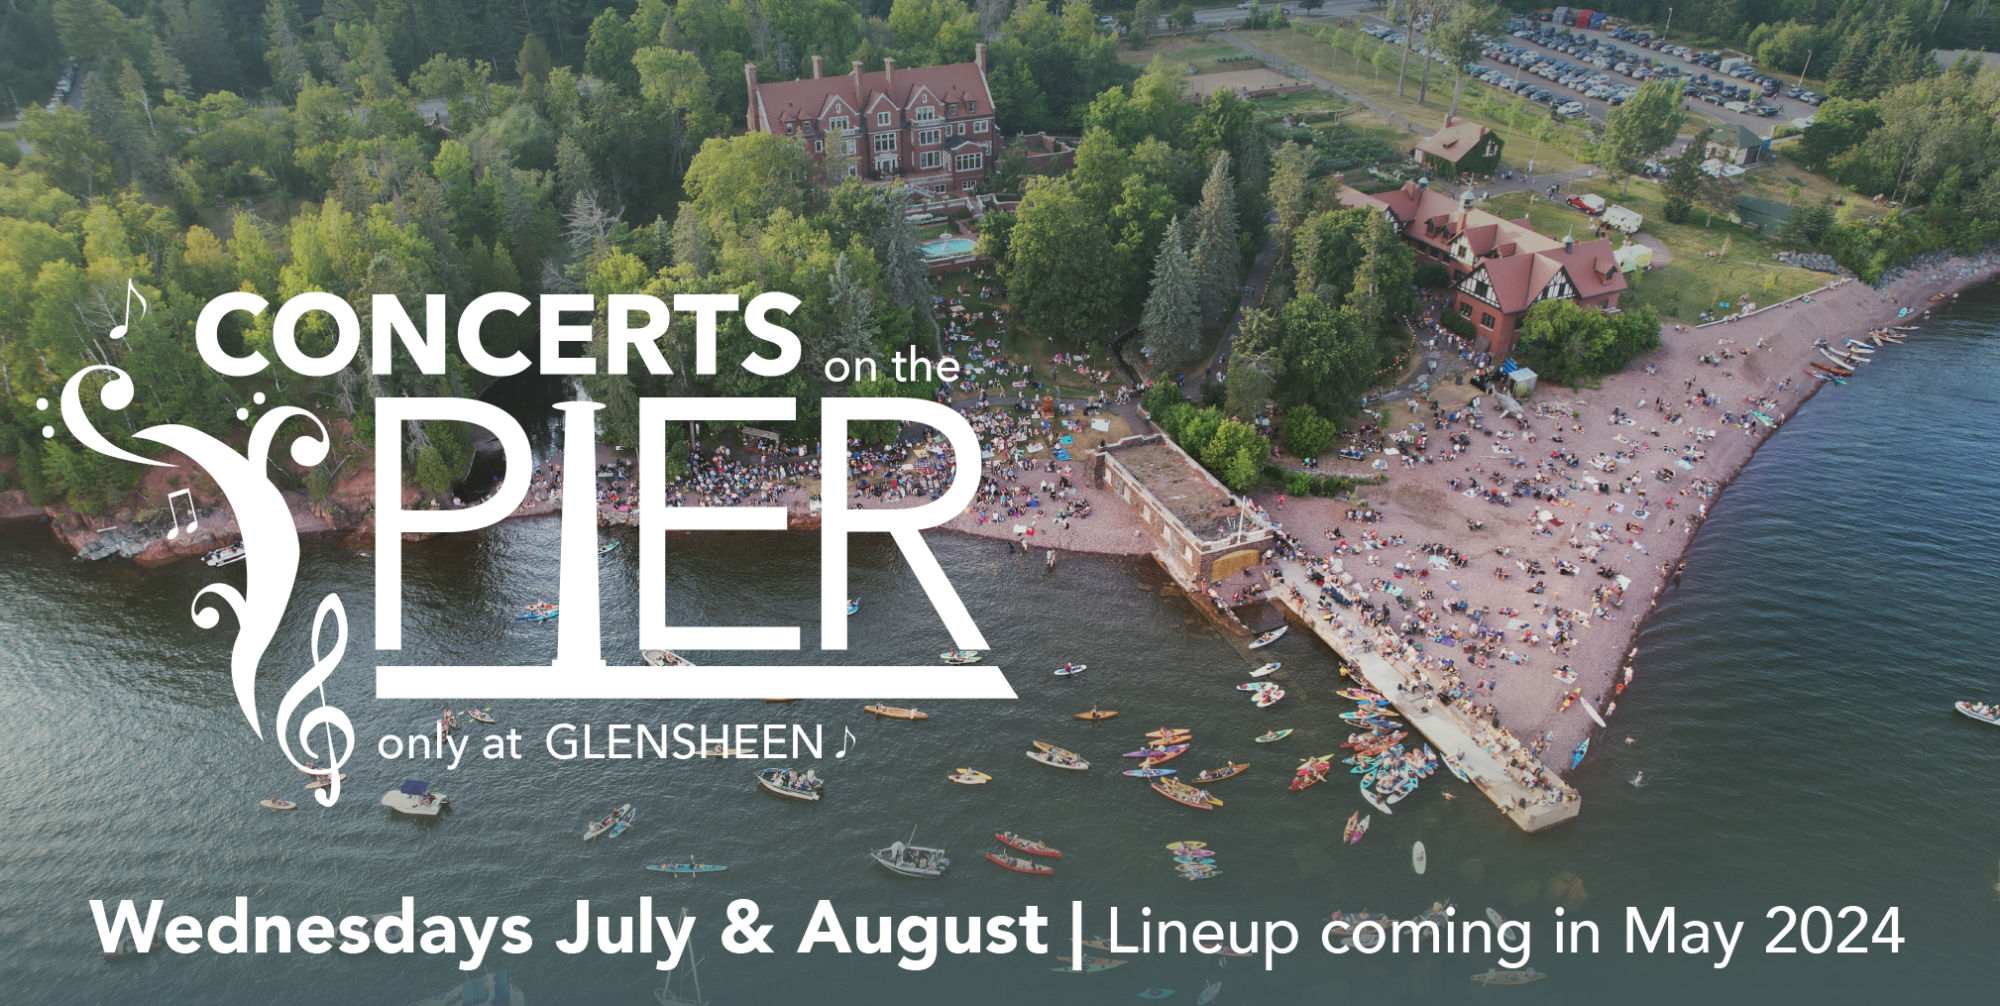 Concerts on the Pier, Wednesdays in July and August. Lineup coming May 2024. Image of a shoreline filled with boats on the water and people along a rock beach facing a concrete pier.